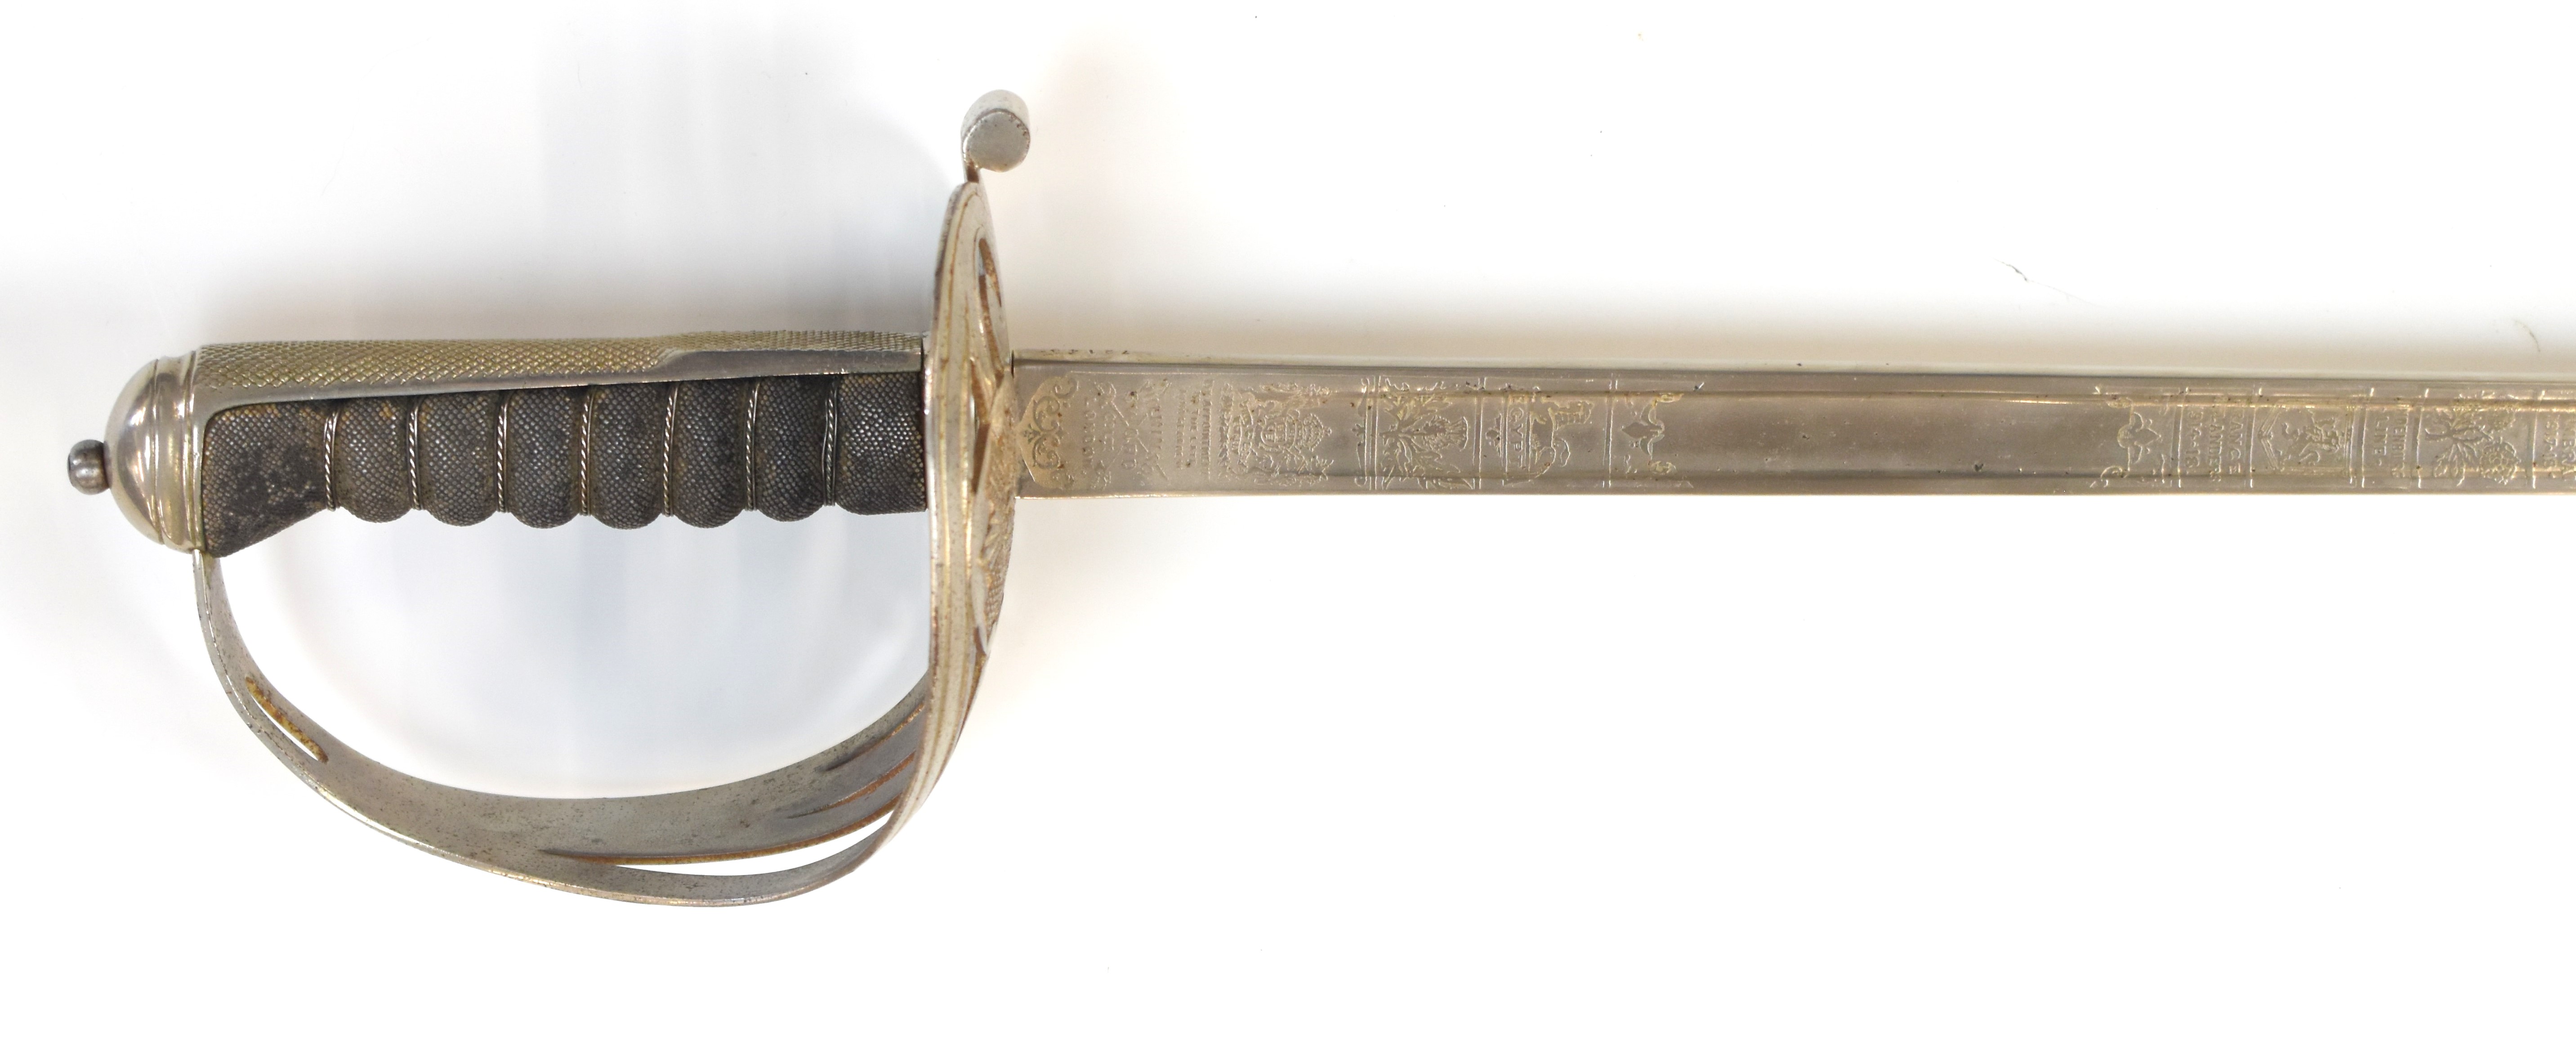 British Army 1854 pattern Scots Guard Foot Guards officer's sword by Wilkinson, number 72148, the - Image 9 of 16